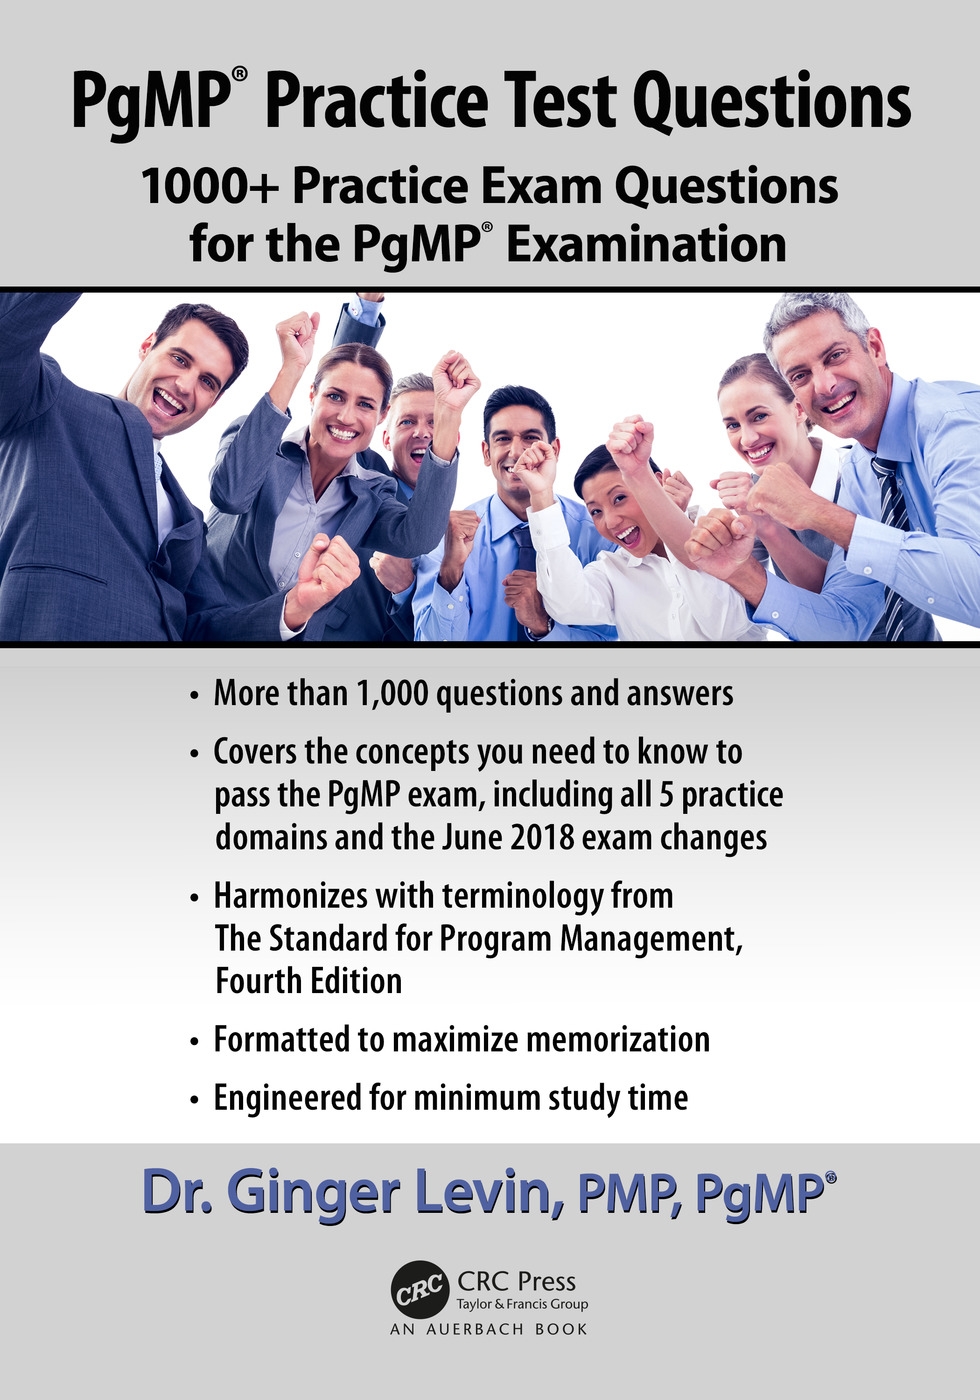 PgMP(R) Practice Test Questions: 1000+ Practice Exam Questions for the PgMP(R) Examination